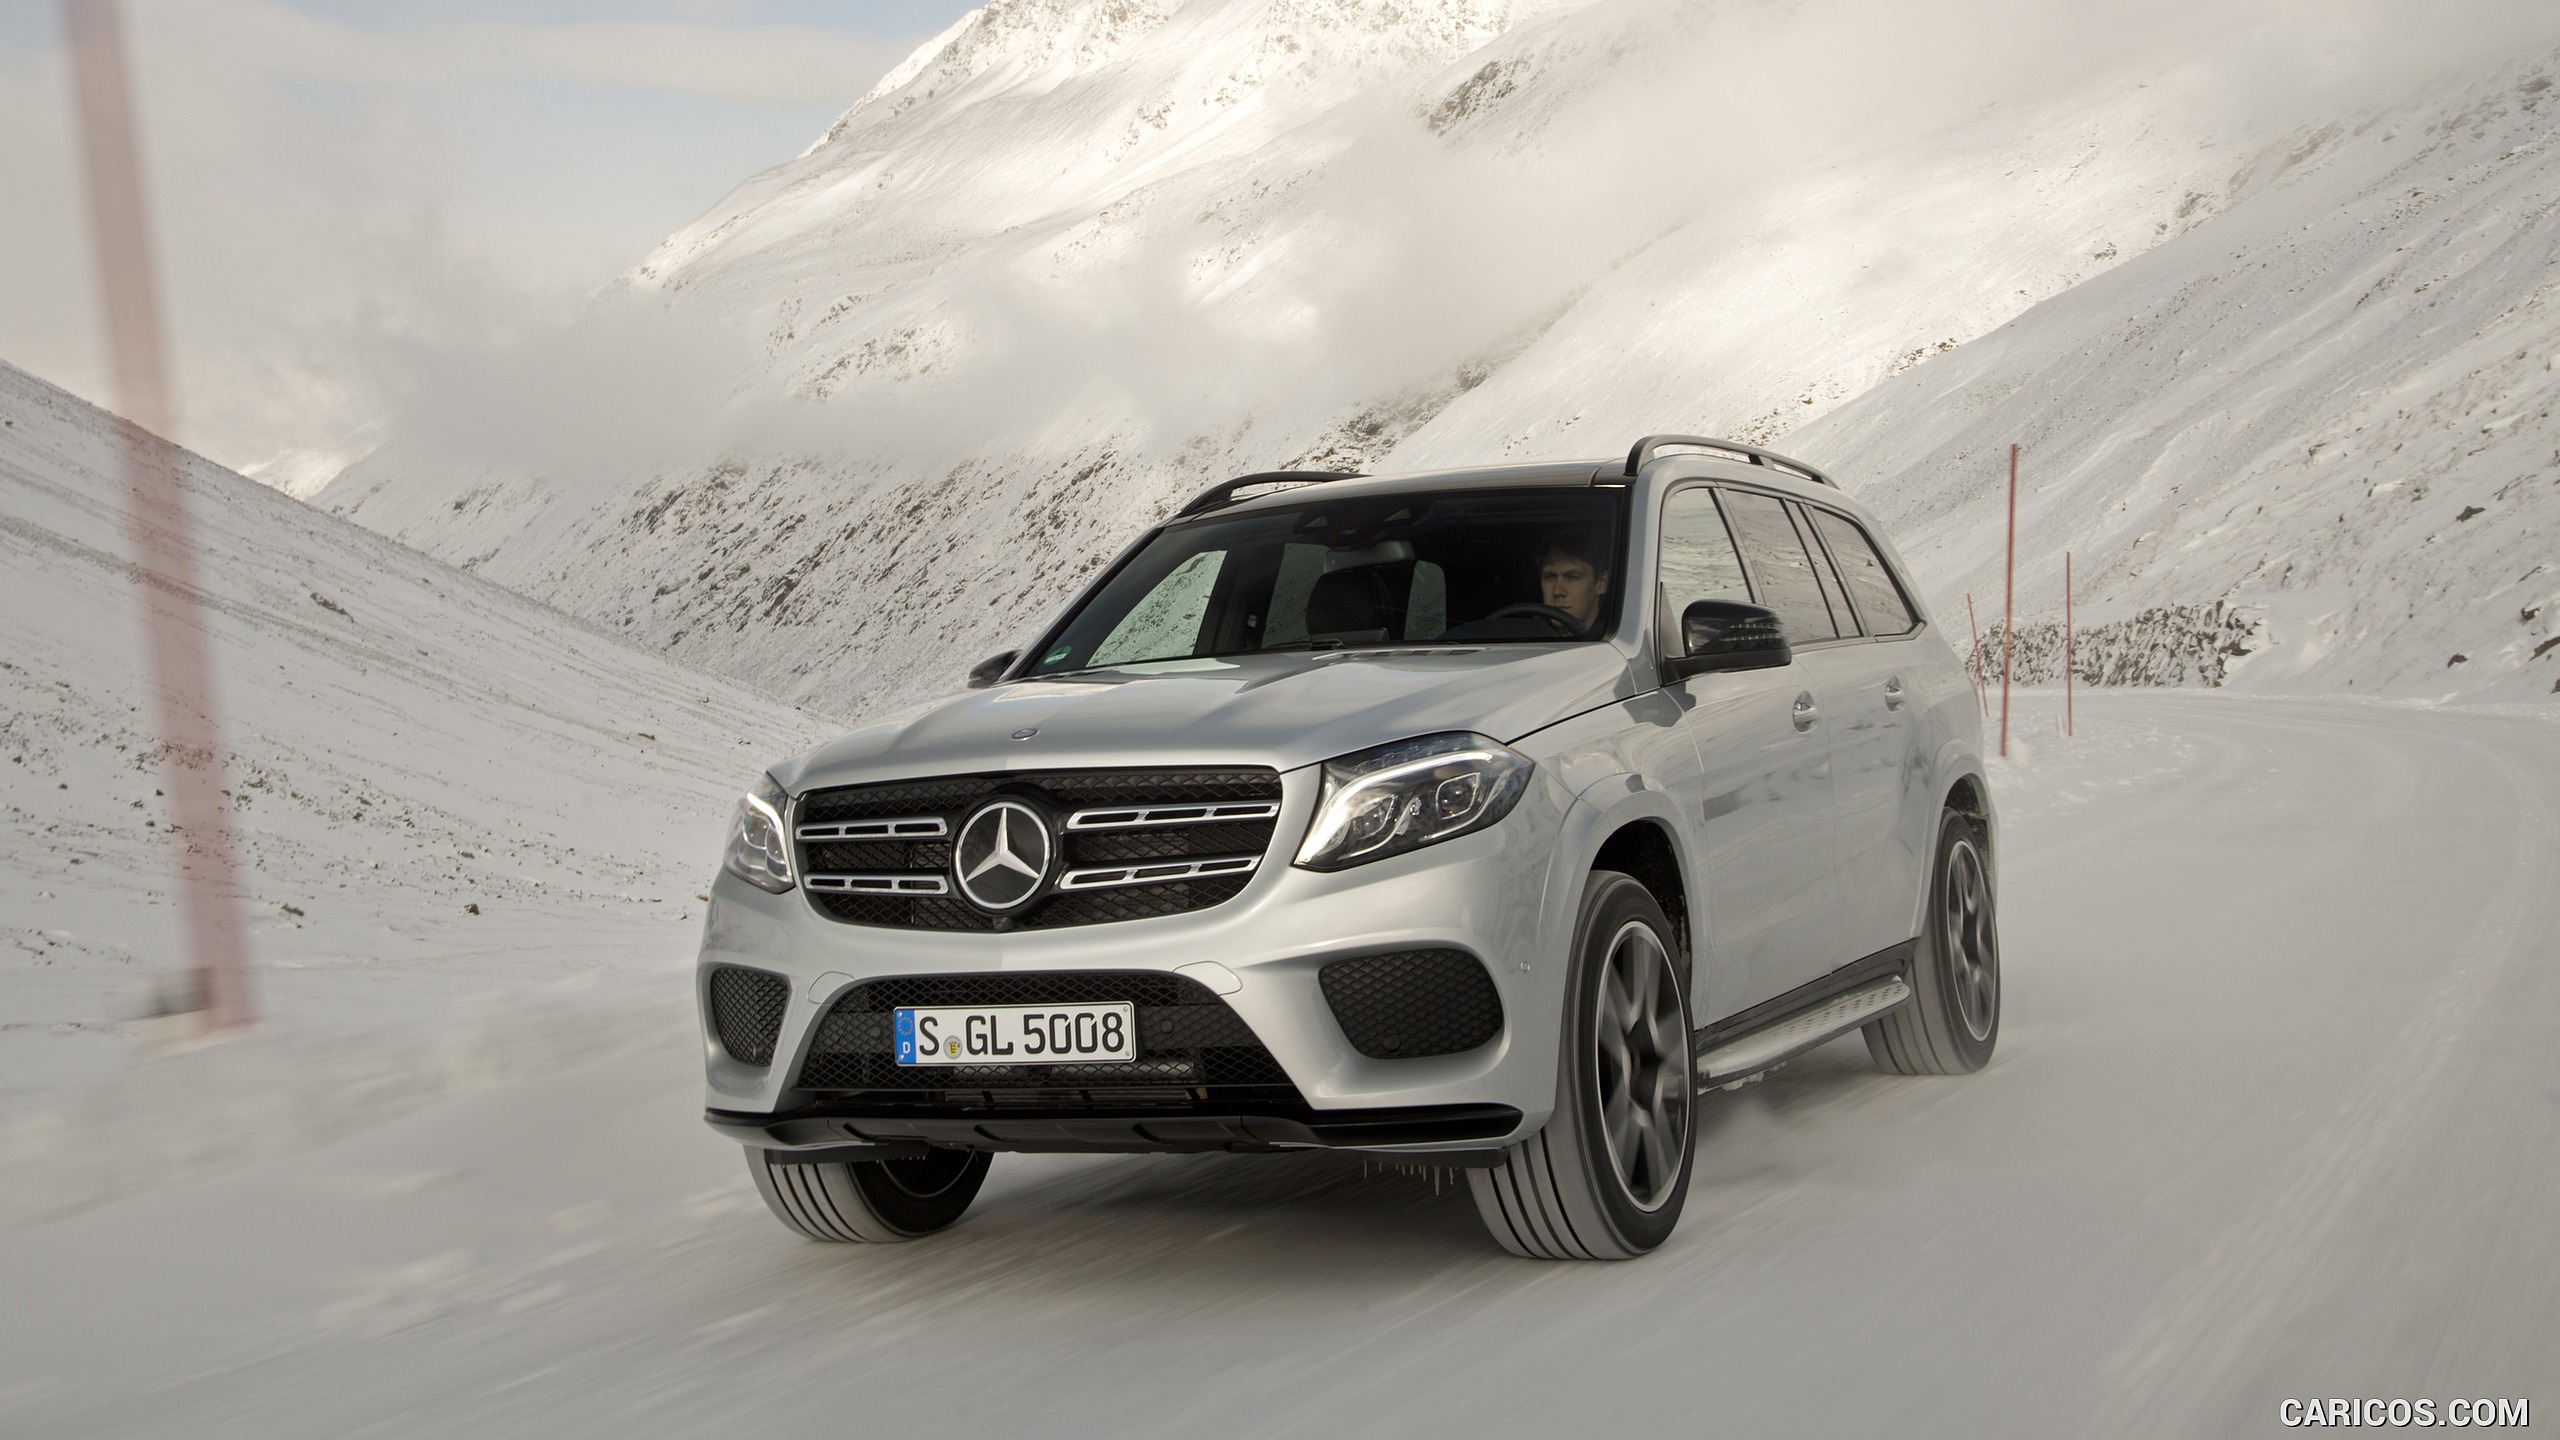 2017 Mercedes-Benz GLS 500 4MATIC AMG Line in Snow - Front, #138 of 255